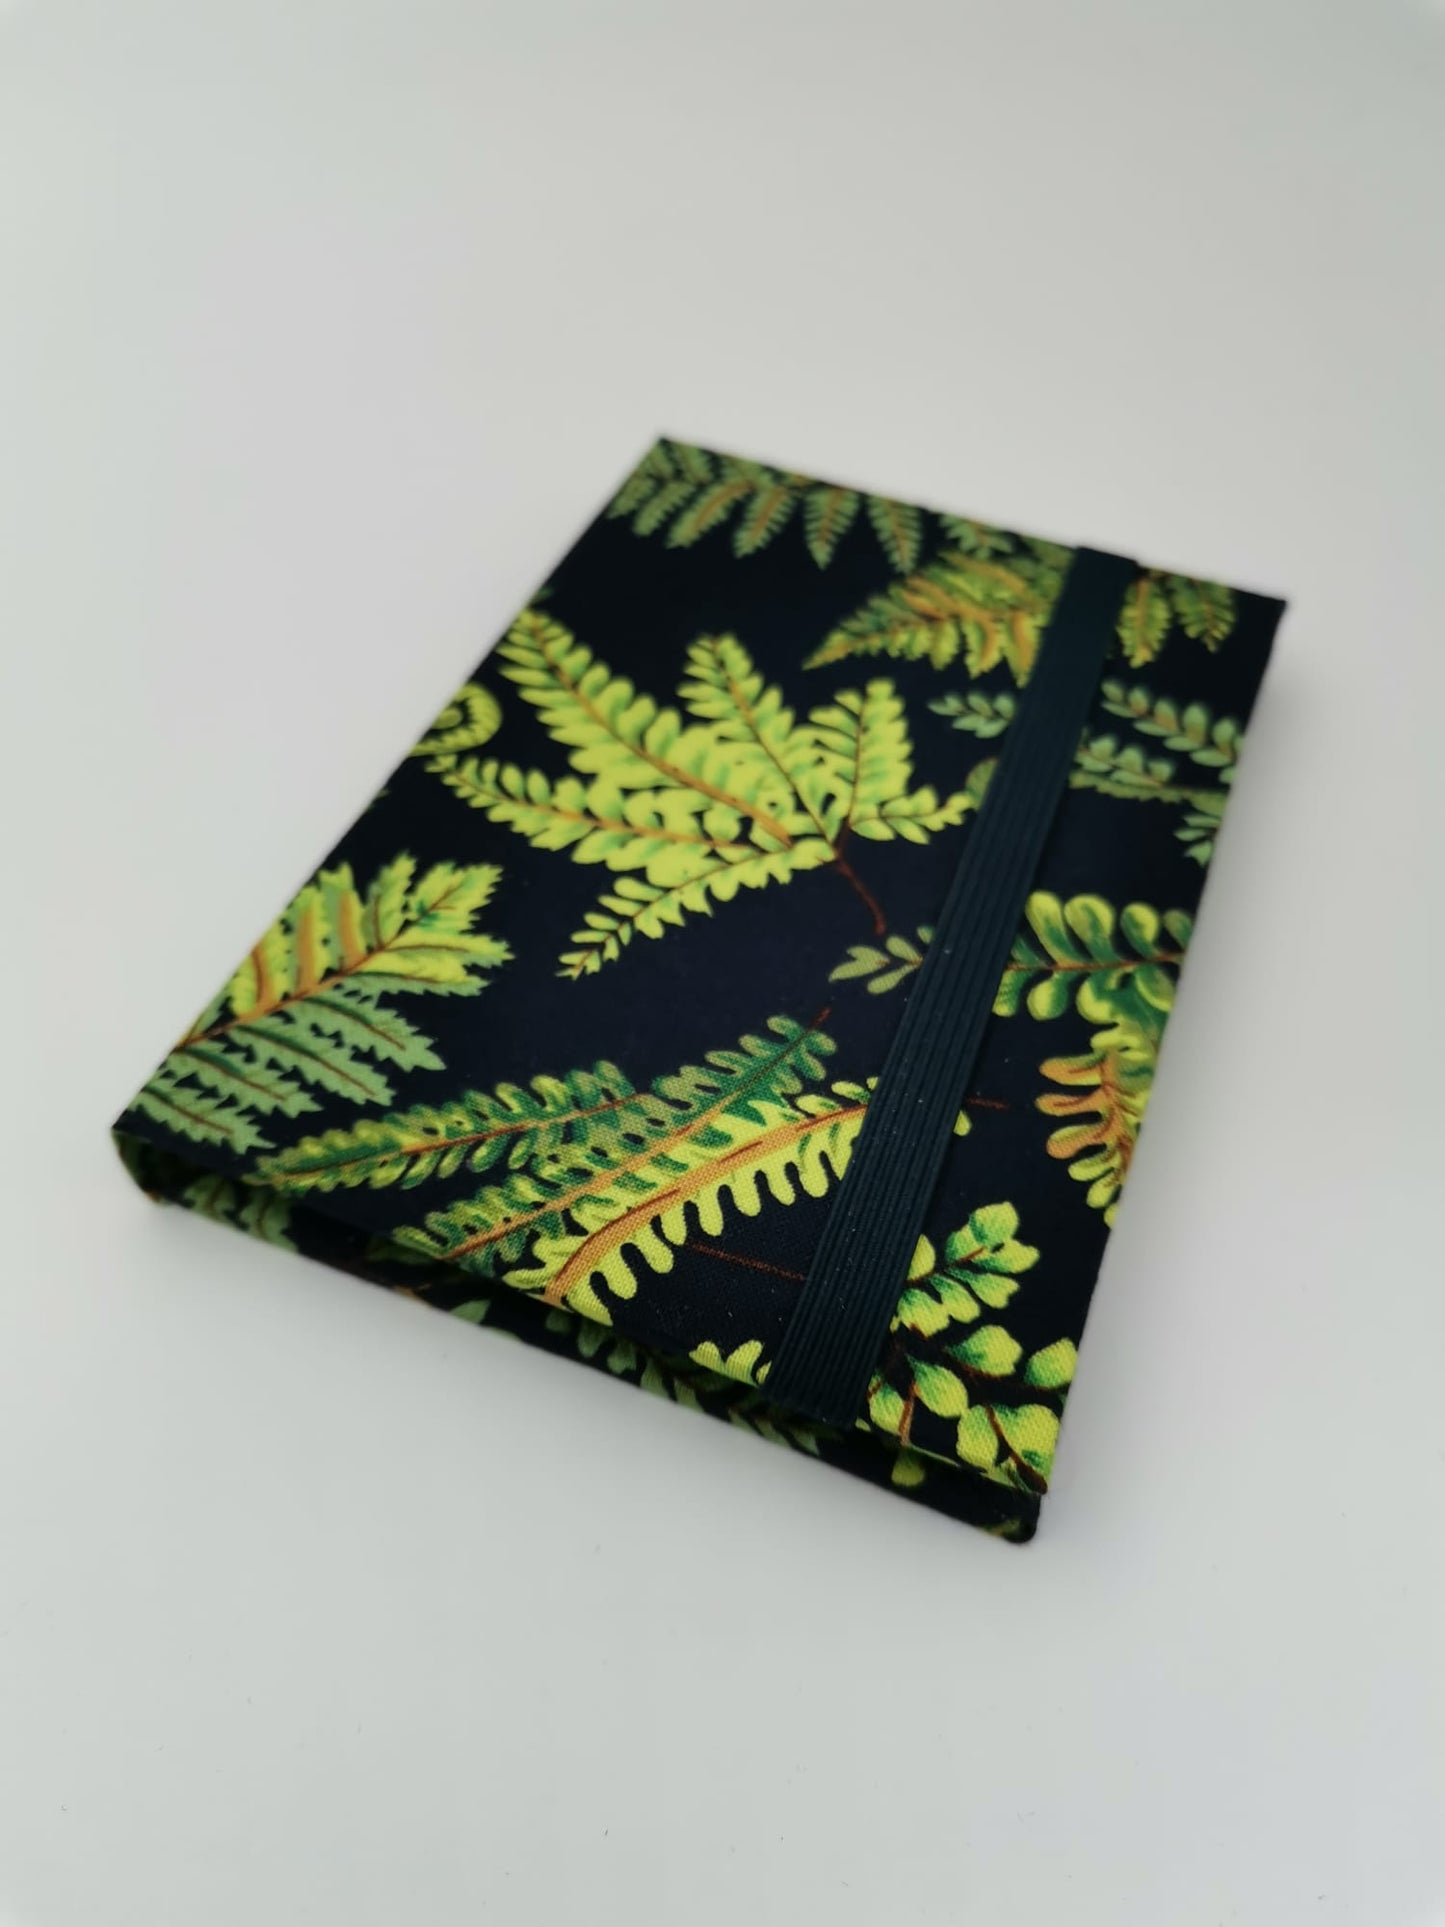 Cartonnage Kit - Passport Cover Now with Secure Protective RFID Blocker!